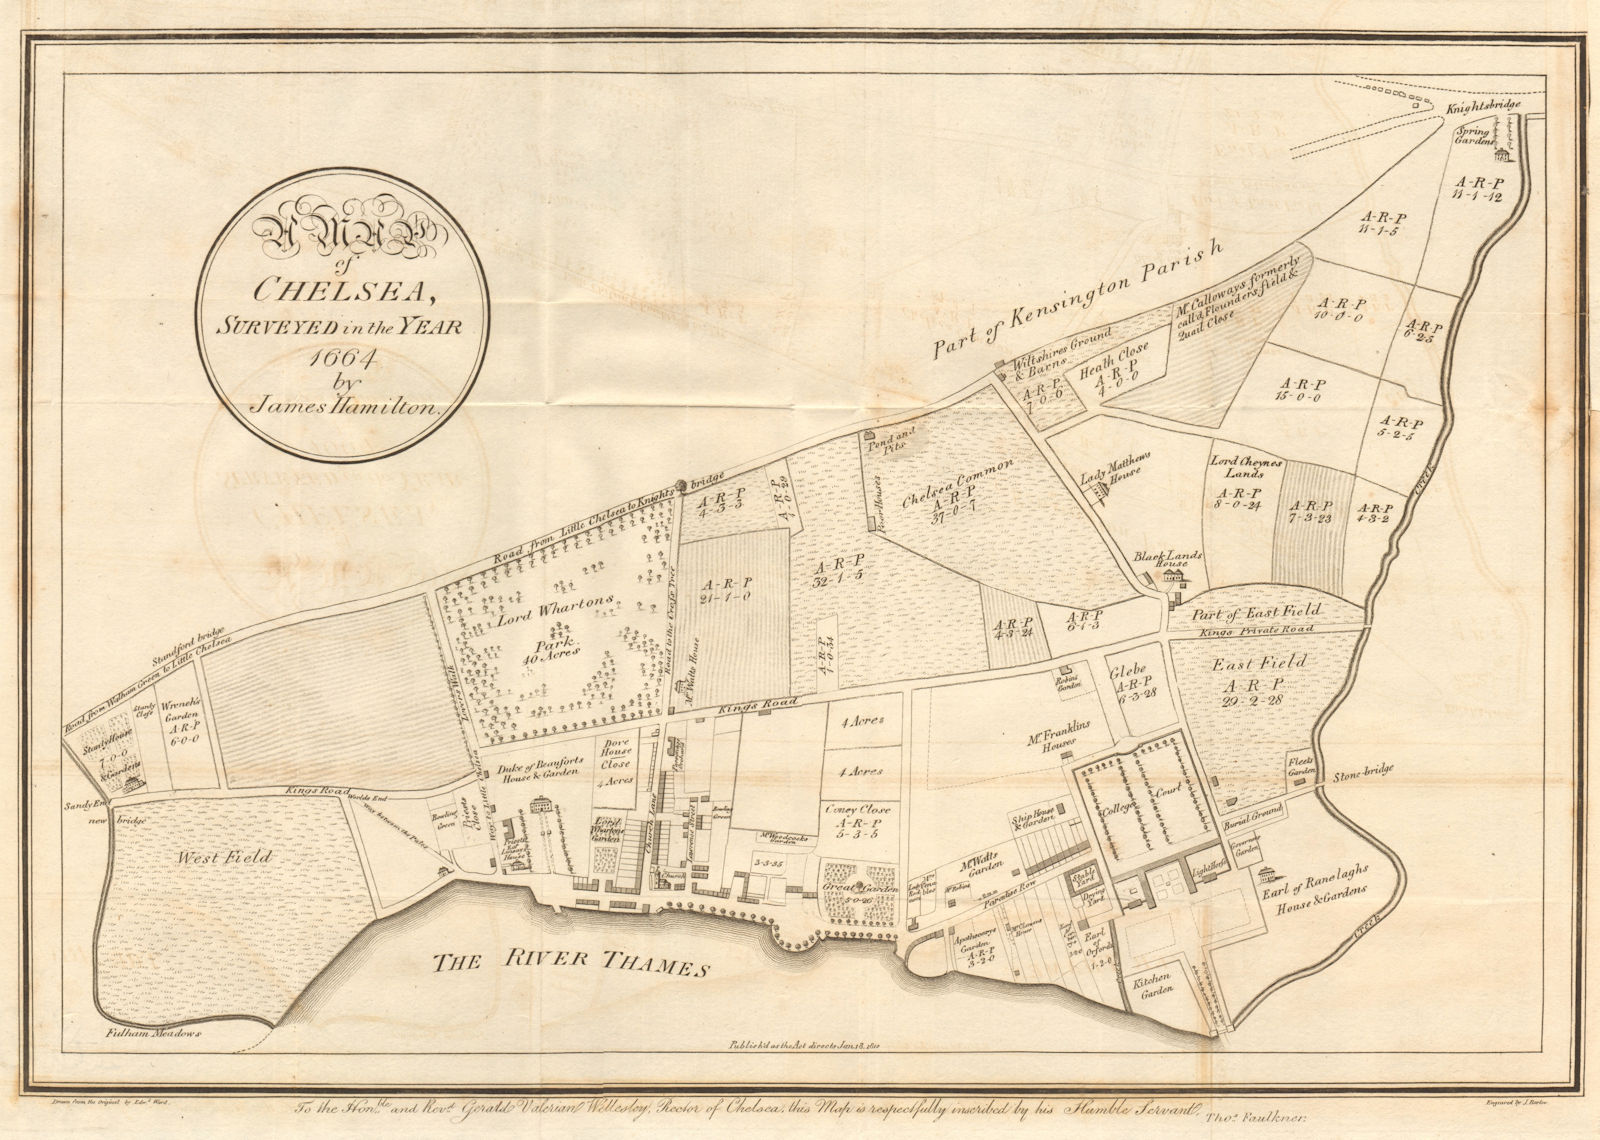 Associate Product "Map of Chelsea surveyed in the year 1664 by James Hamilton". FAULKNER 1810